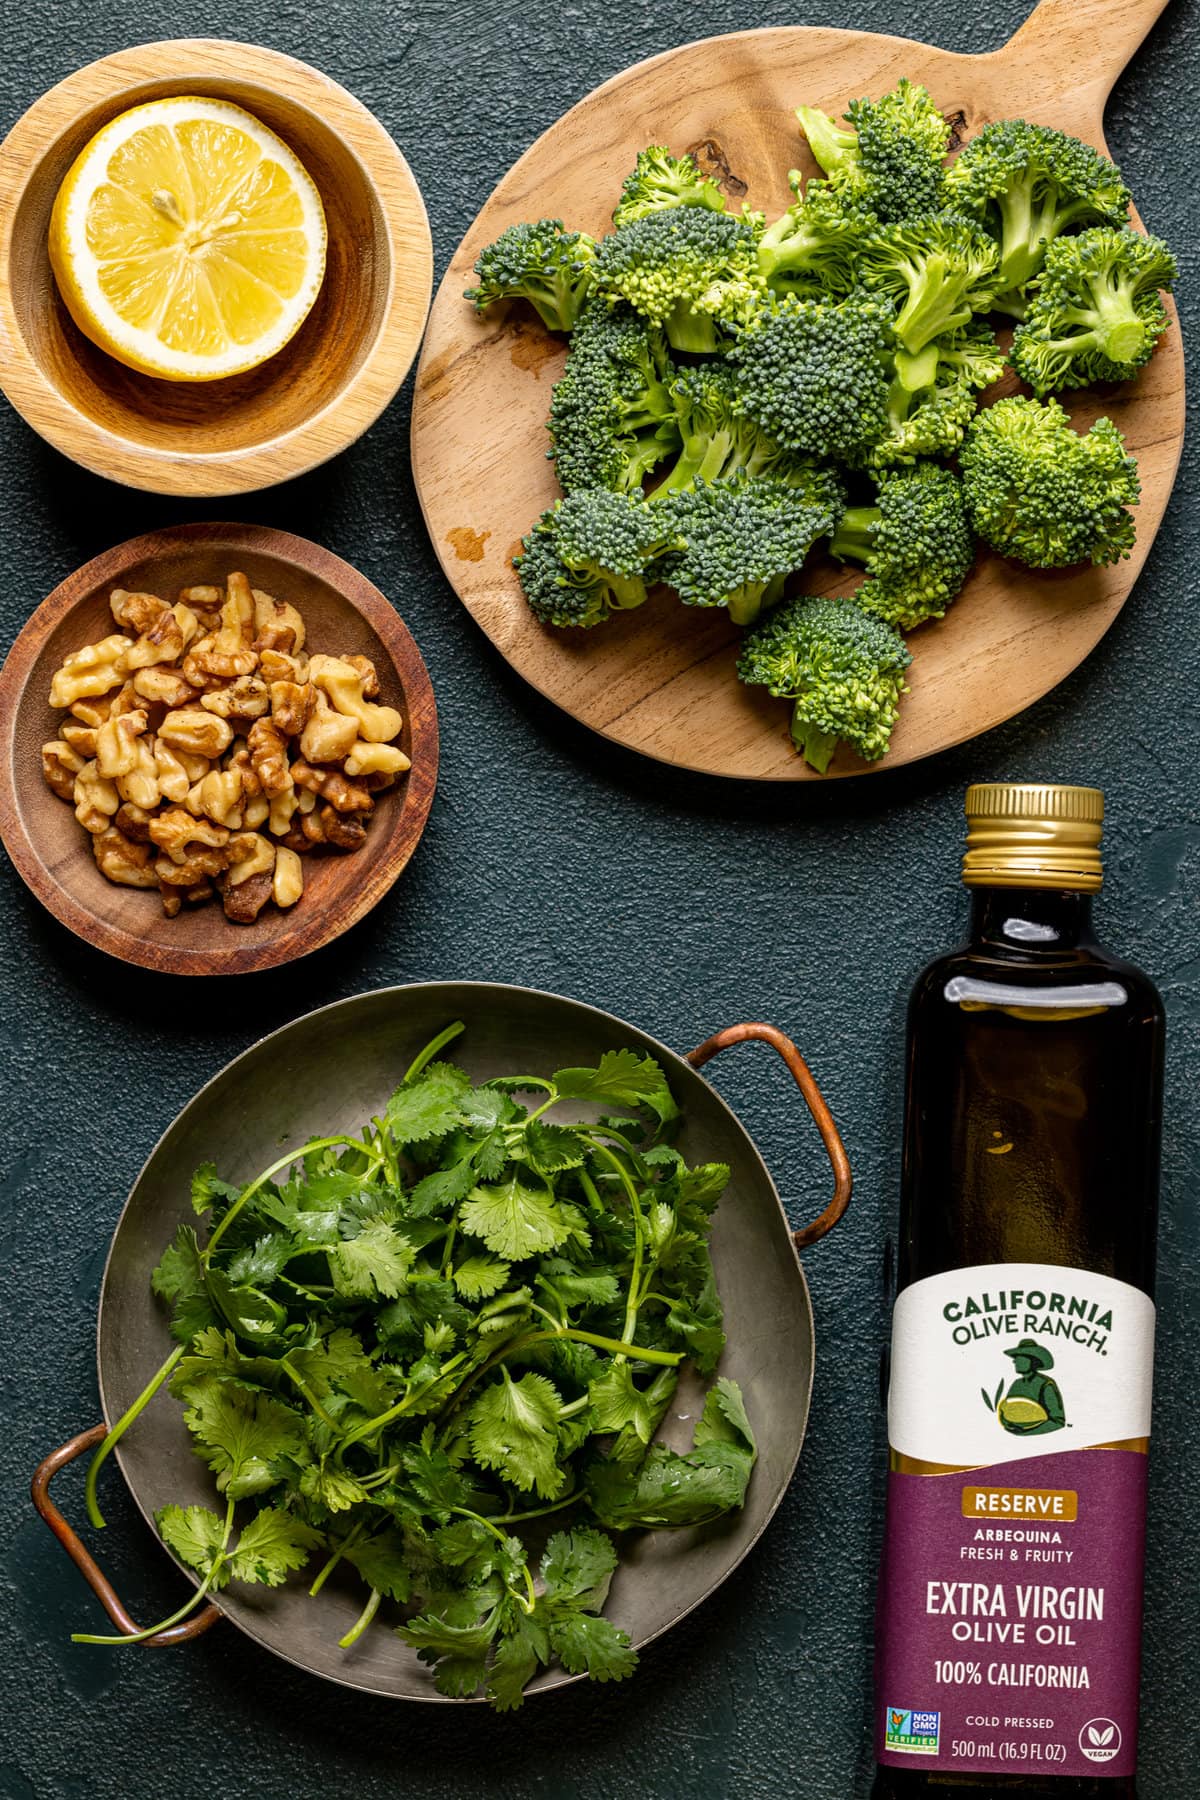 Ingredients for Broccoli Pesto Gnocchi with Chickpeas including broccoli, olive oil, and lemon